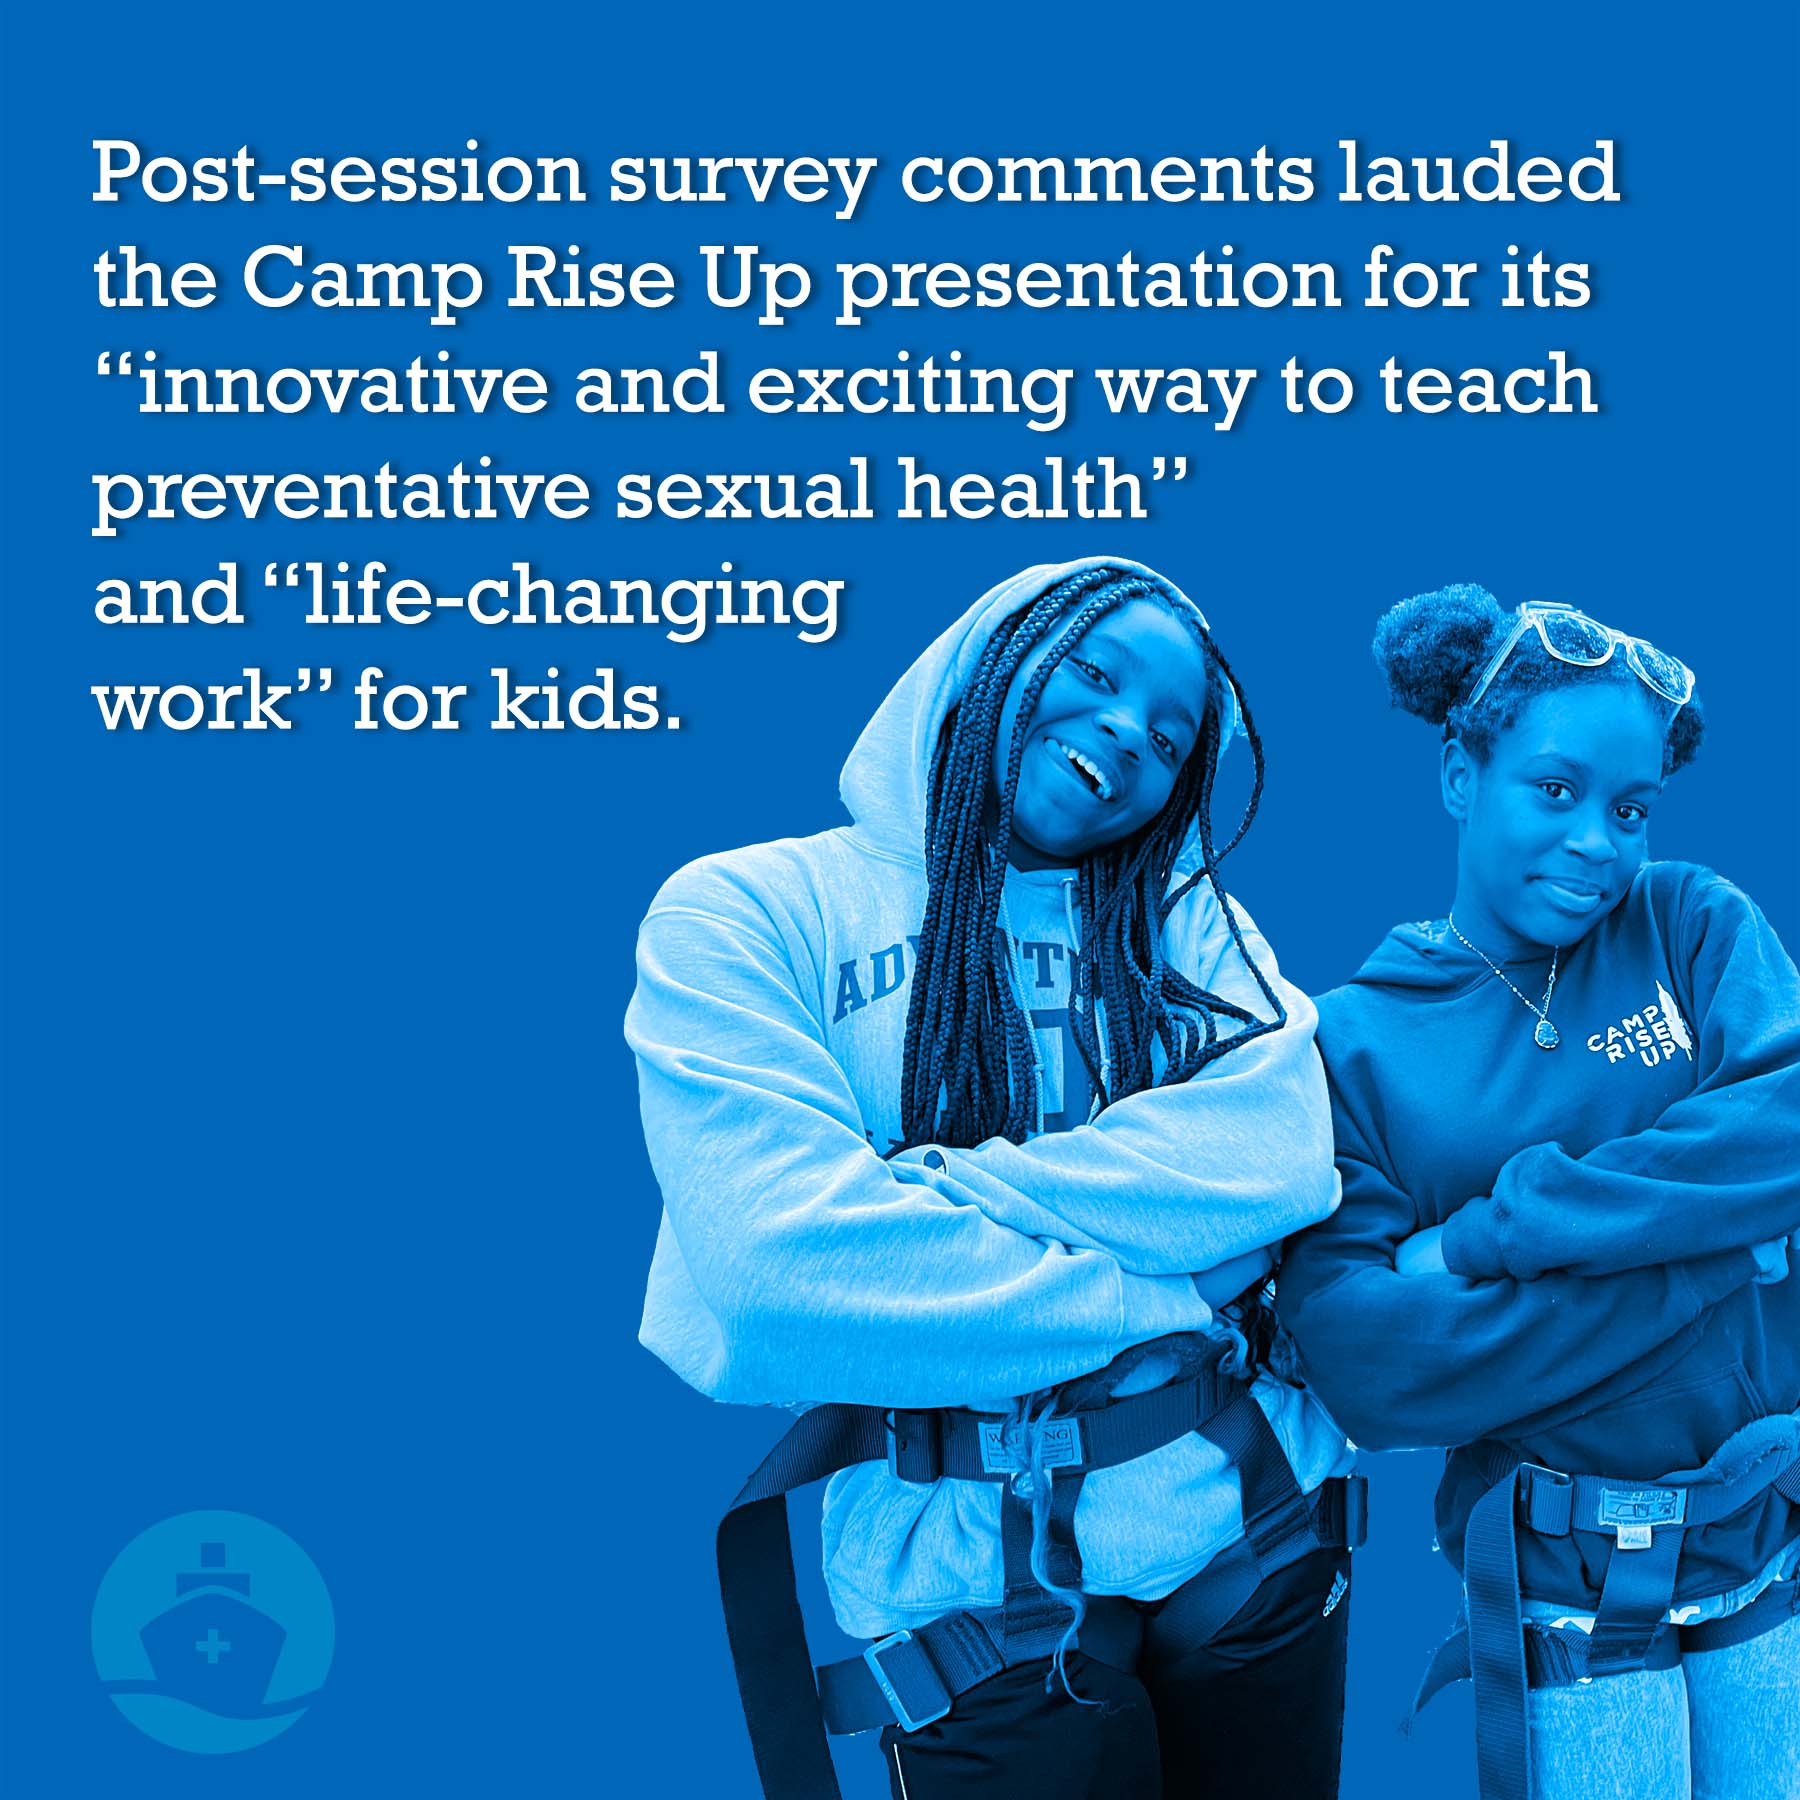 Post-session survey comments lauded the Camp Rise Up presentation for its “innovative and exciting way to teach preventative sexual health” and “life-changing work” for kids.